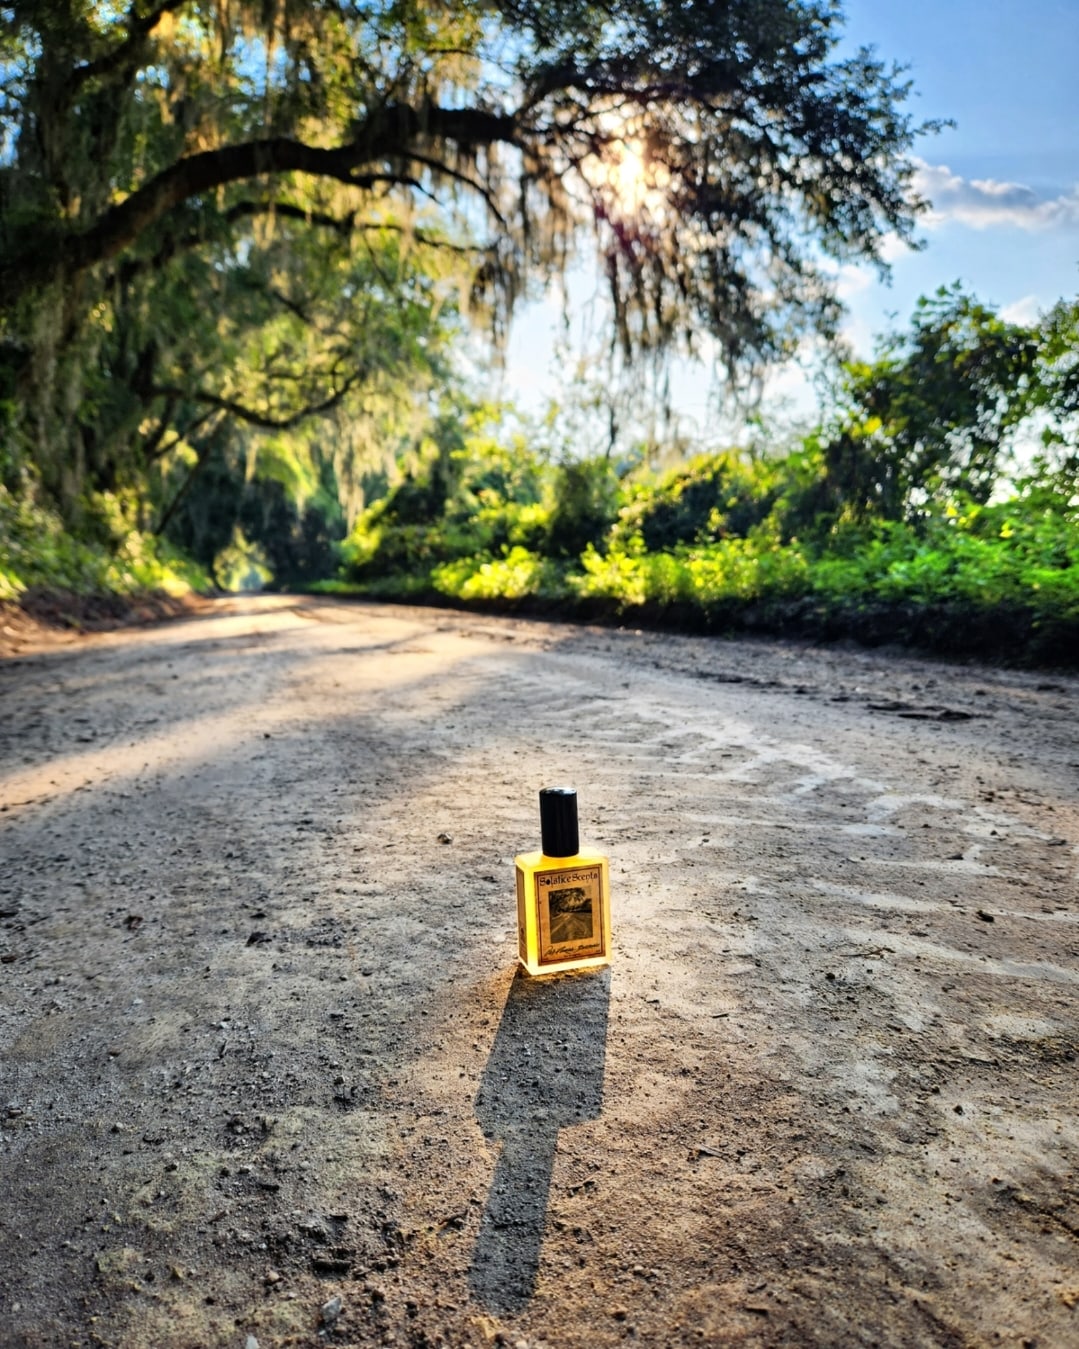 Outdated Florida Roads by Solstice Scents